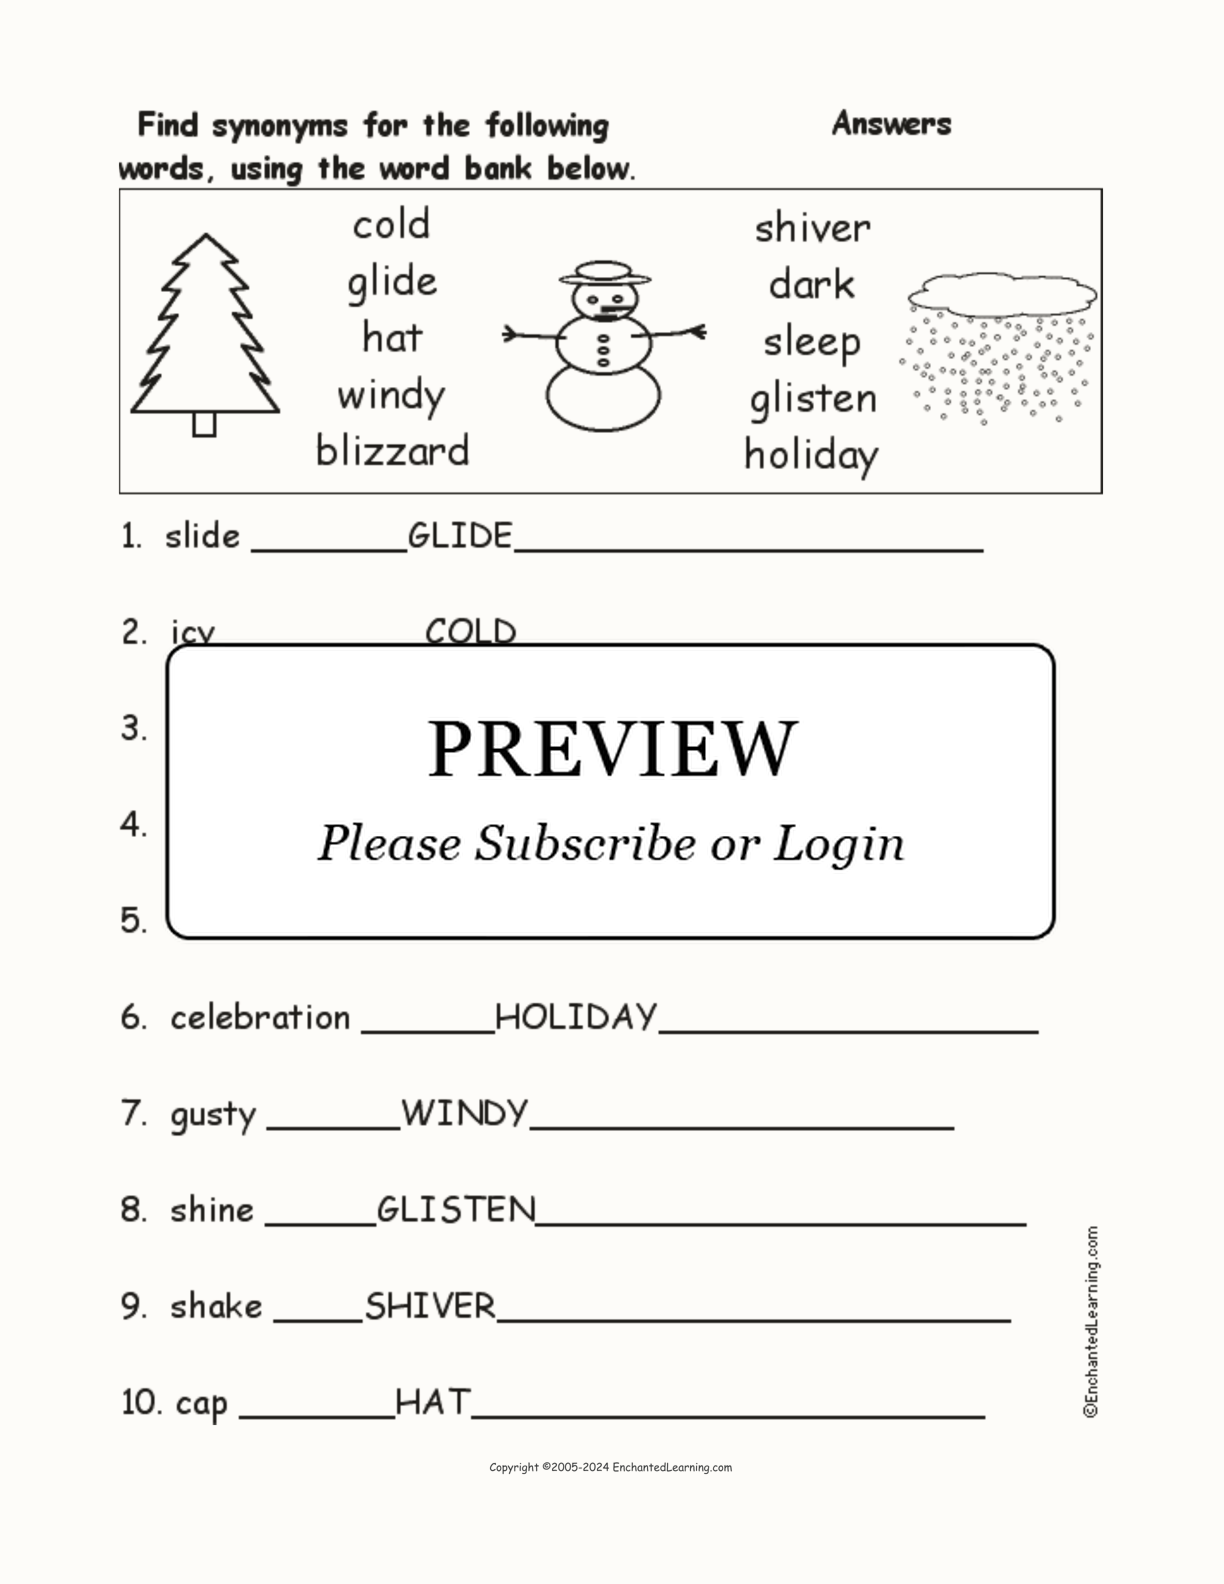 Winter Synonyms interactive worksheet page 2